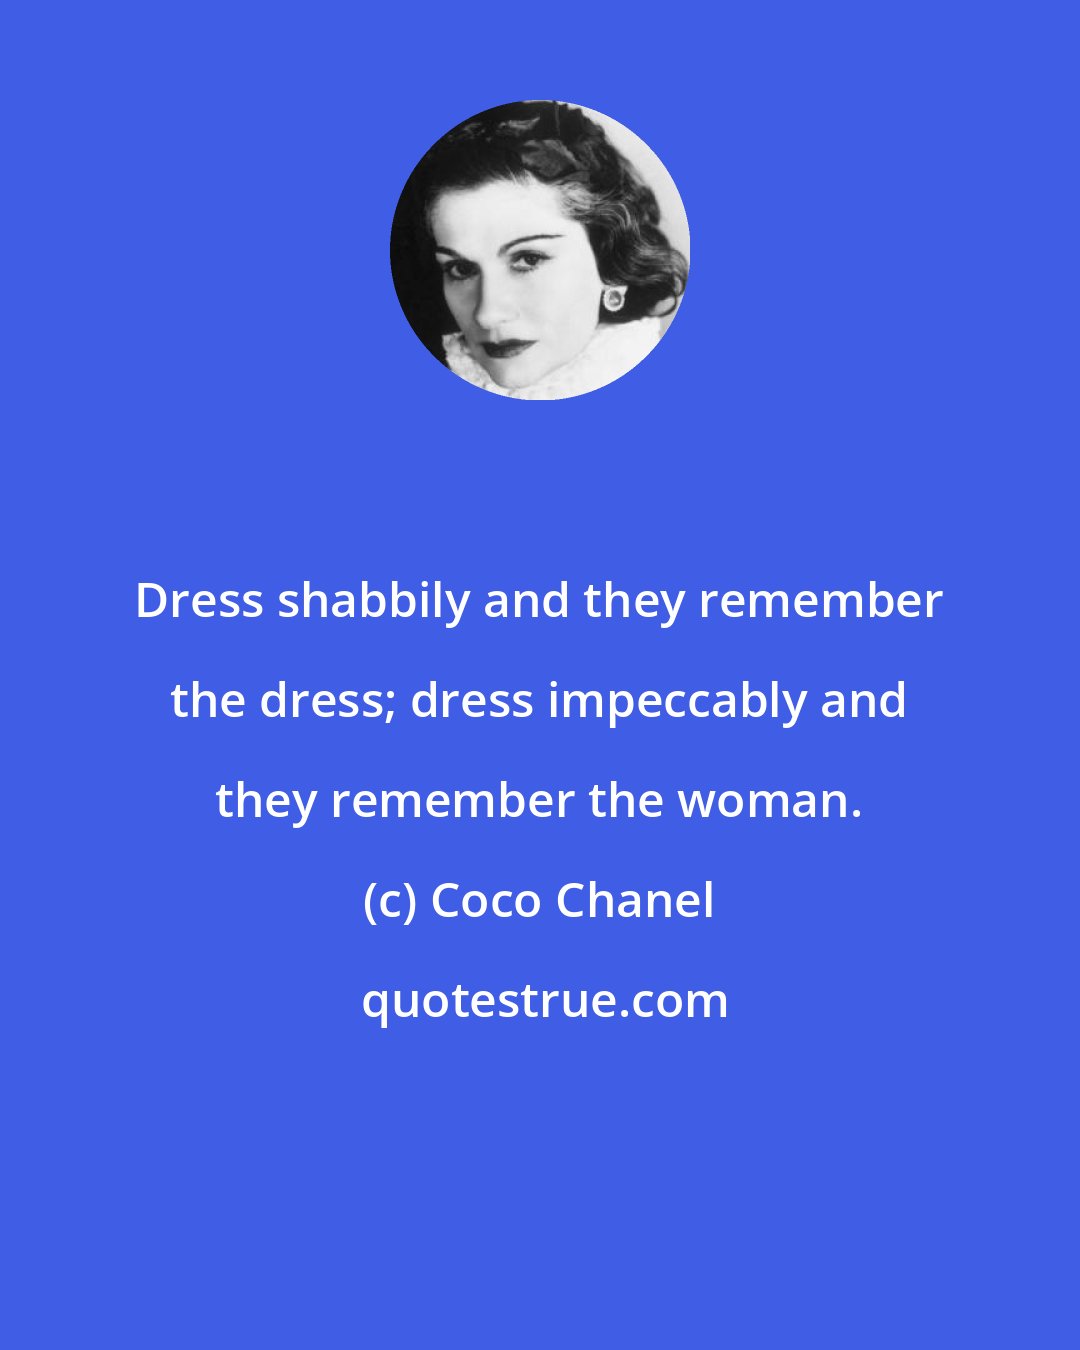 Coco Chanel: Dress shabbily and they remember the dress; dress impeccably and they remember the woman.